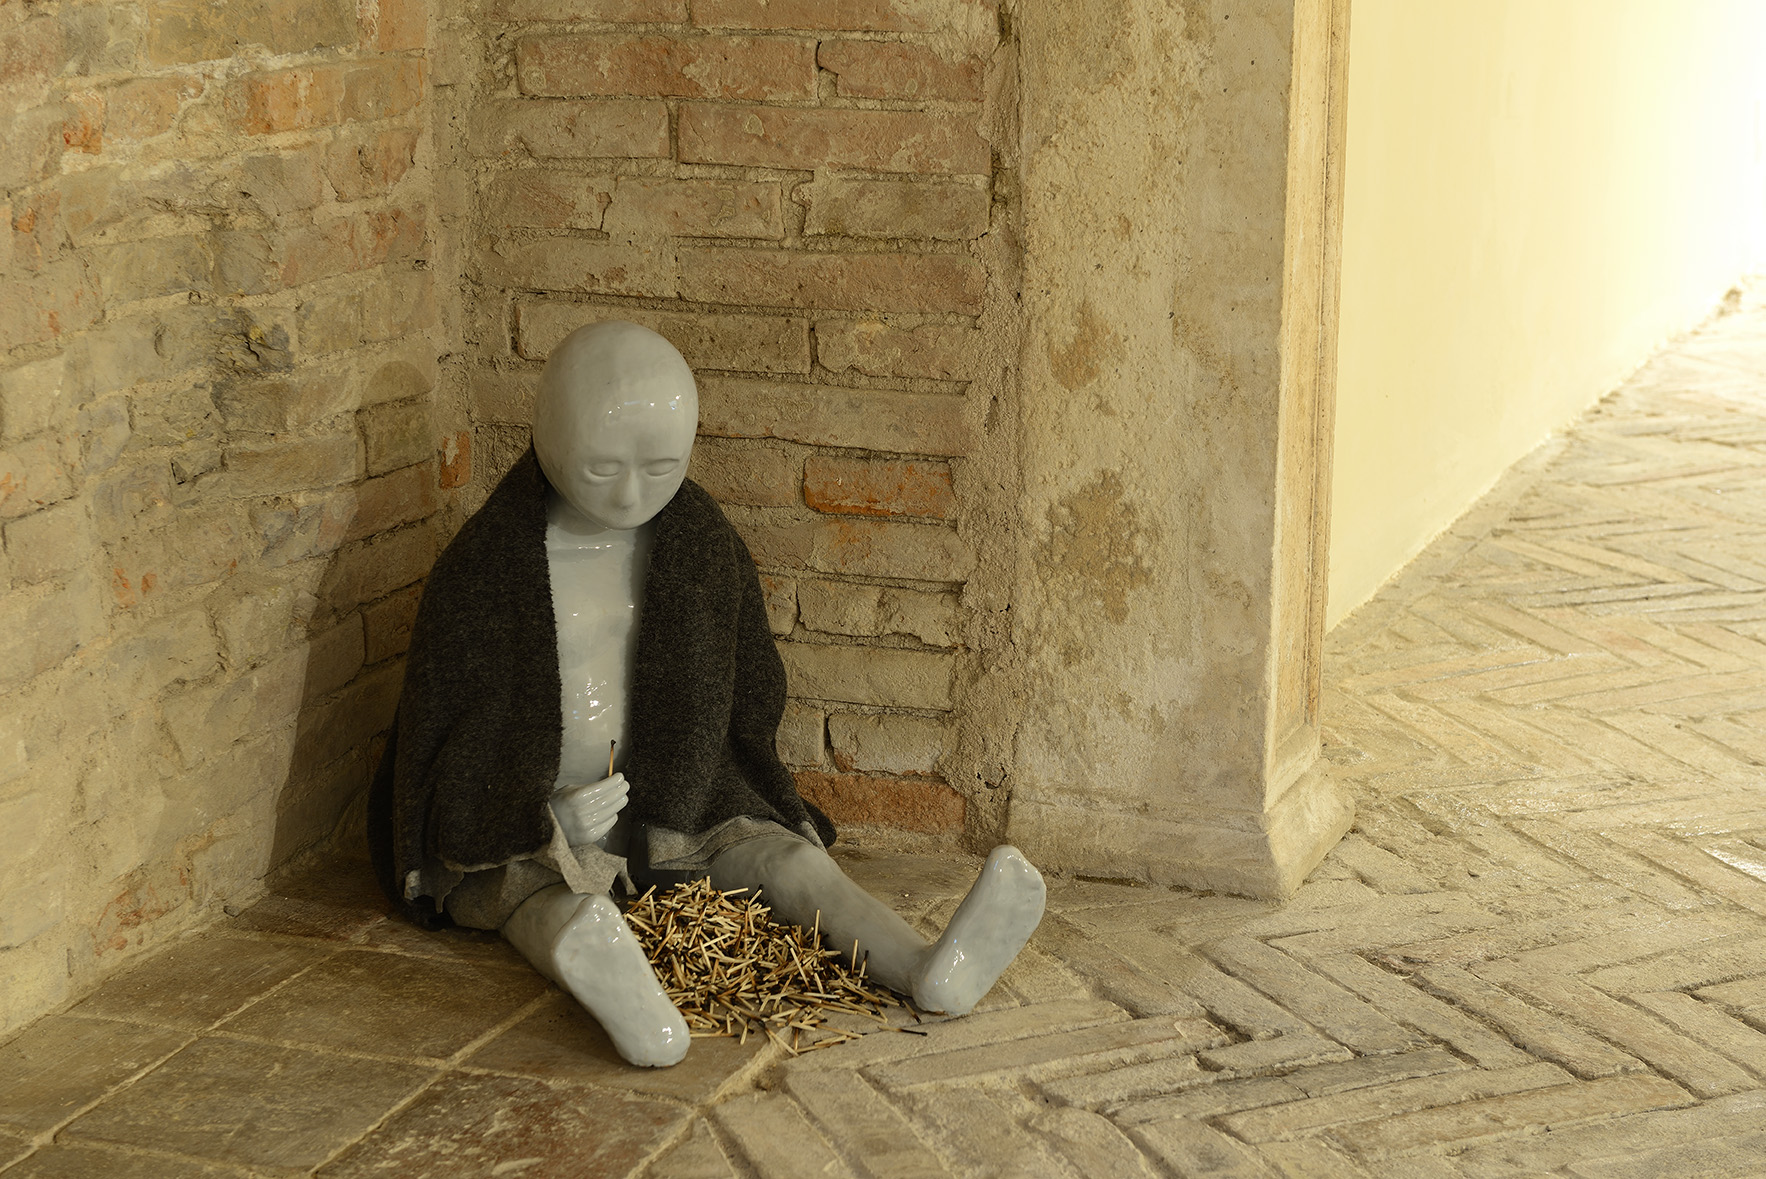 Selfportrait from another planet, glazed ceramic fabric burned matches, installation view, Palazzo Ducale di Urbino, 2017